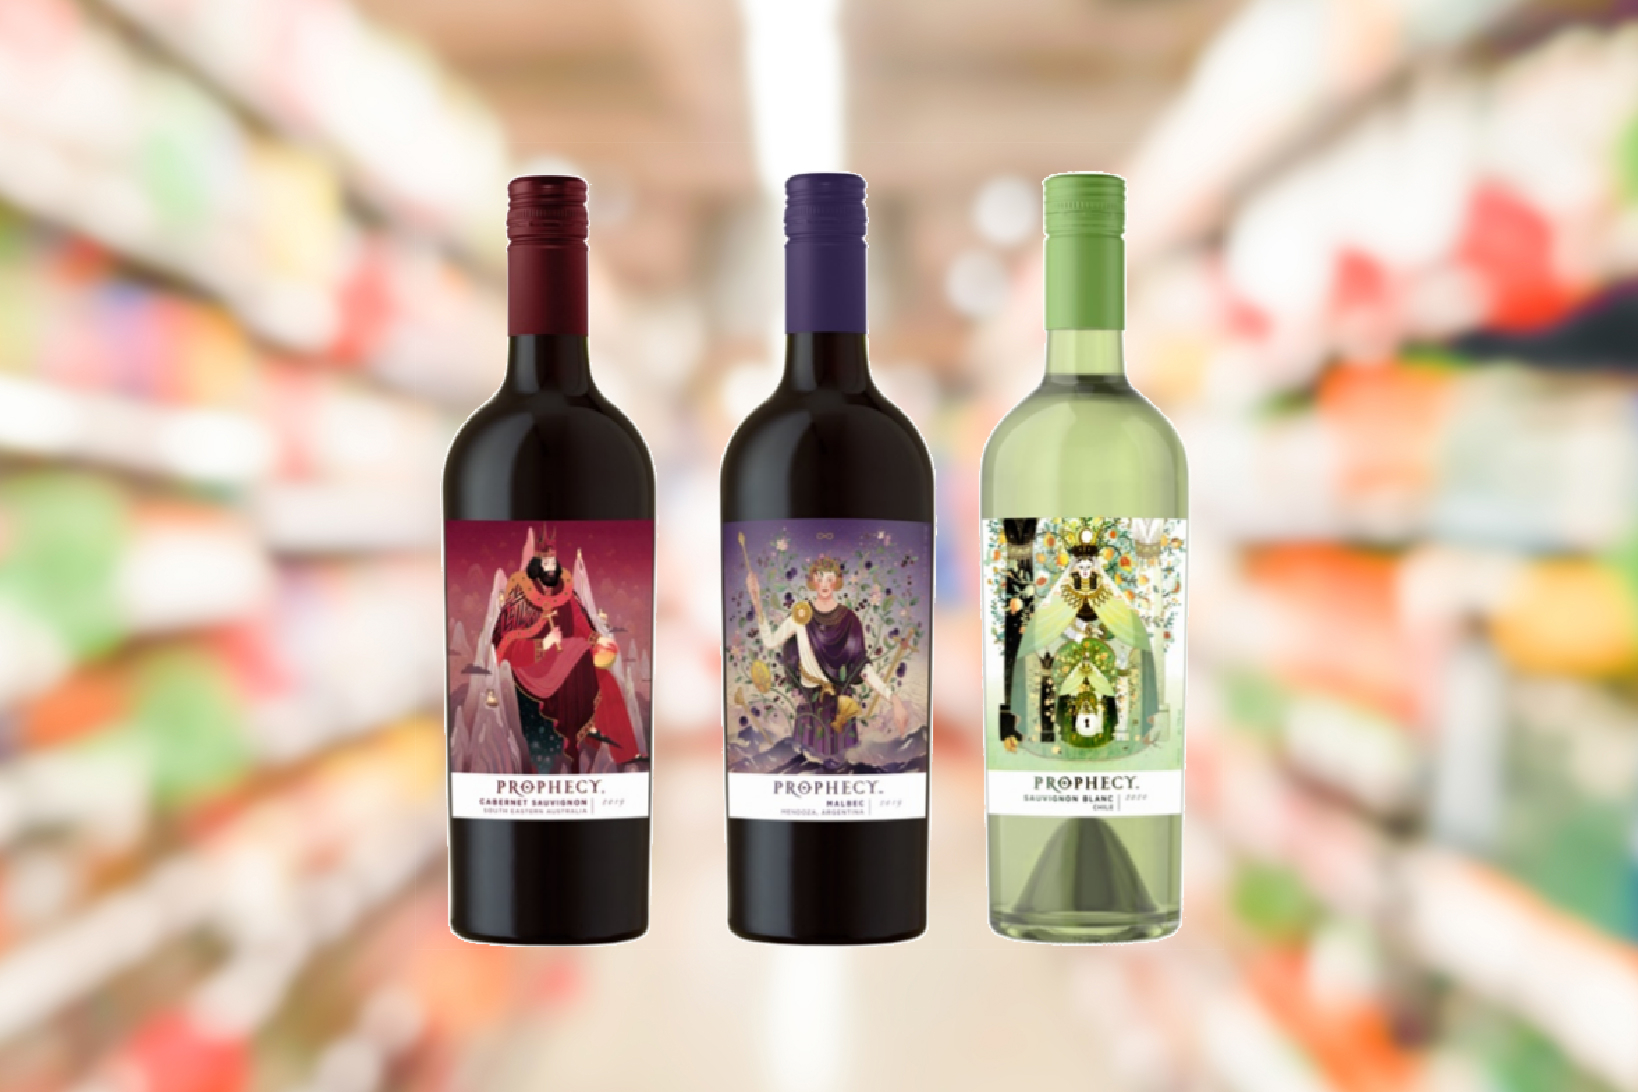 Product news Prophecy wines